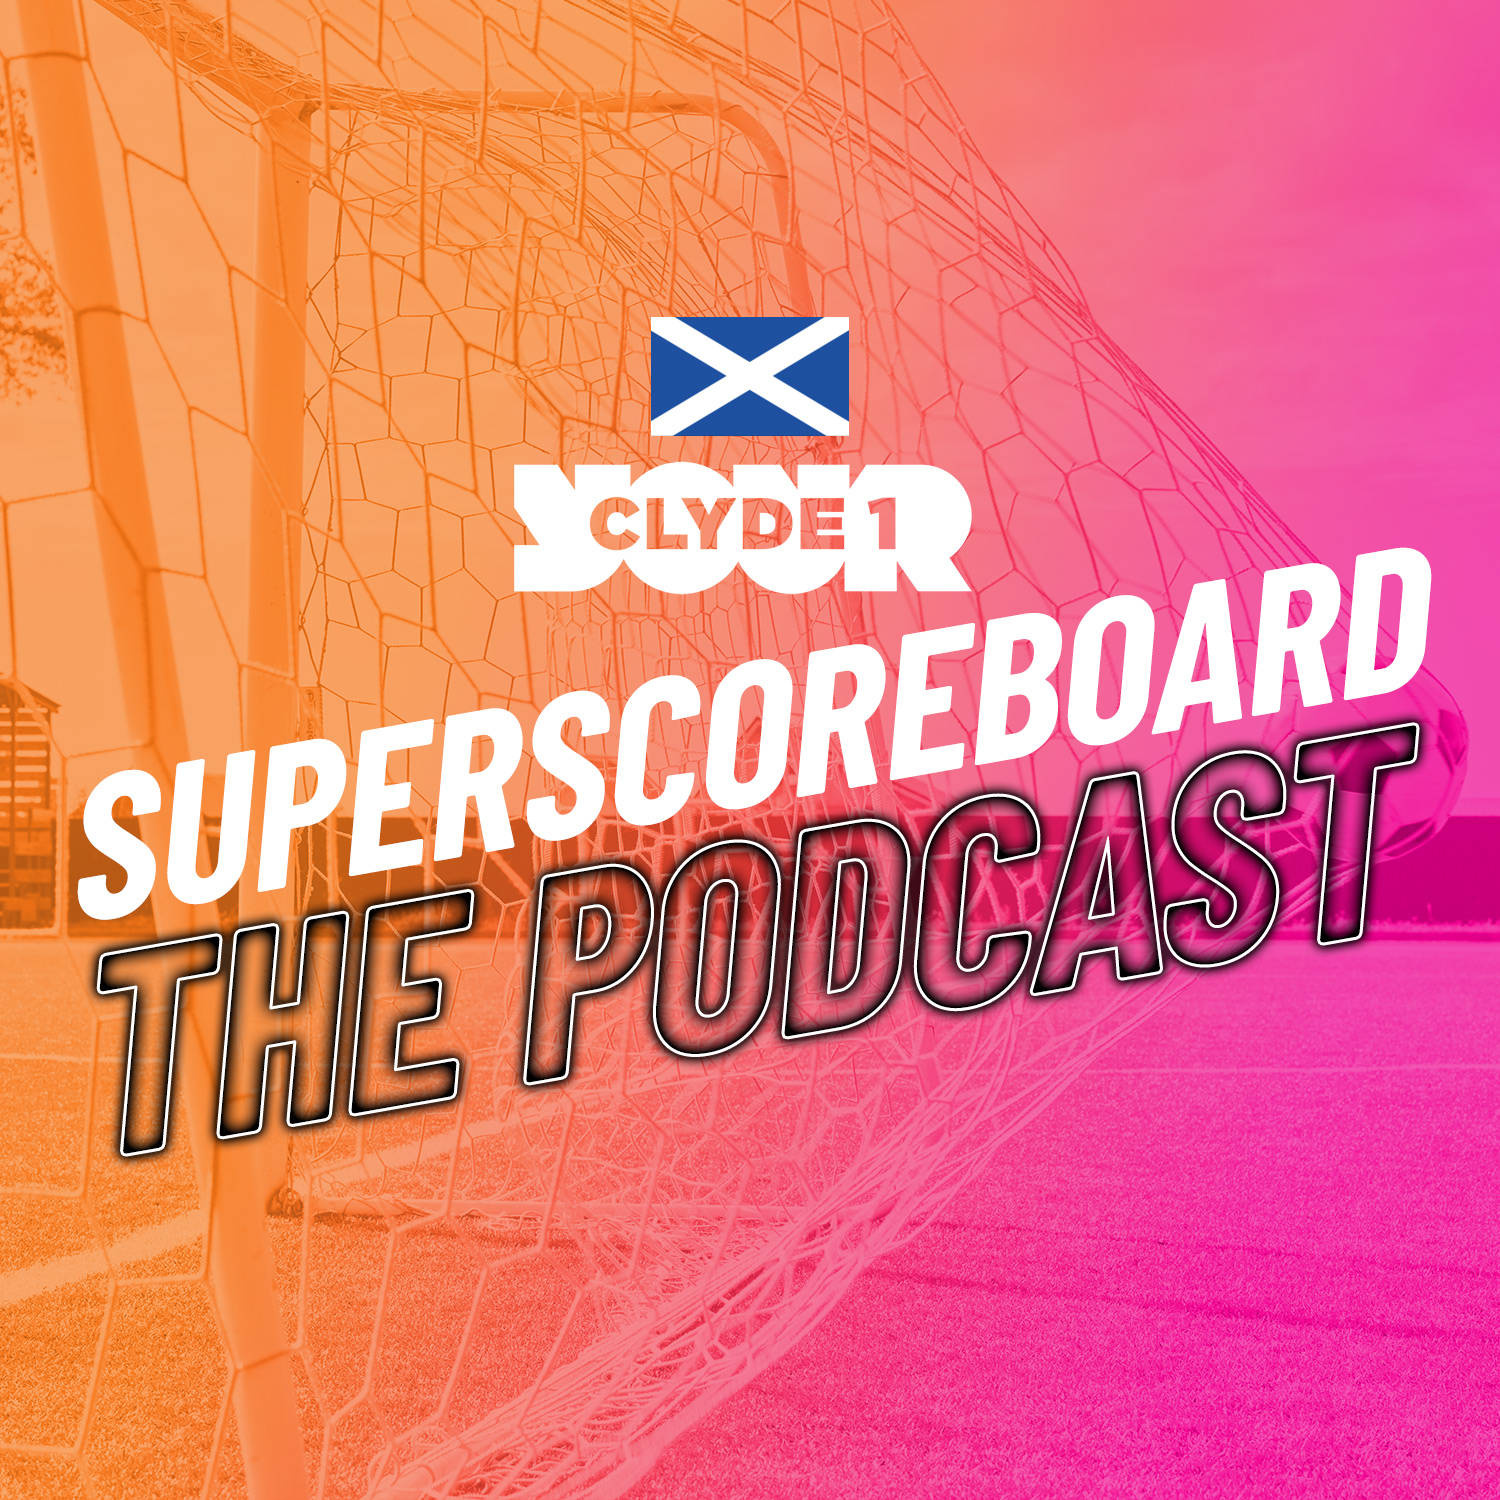 Thursday 4th January Clyde 1 Superscoreboard